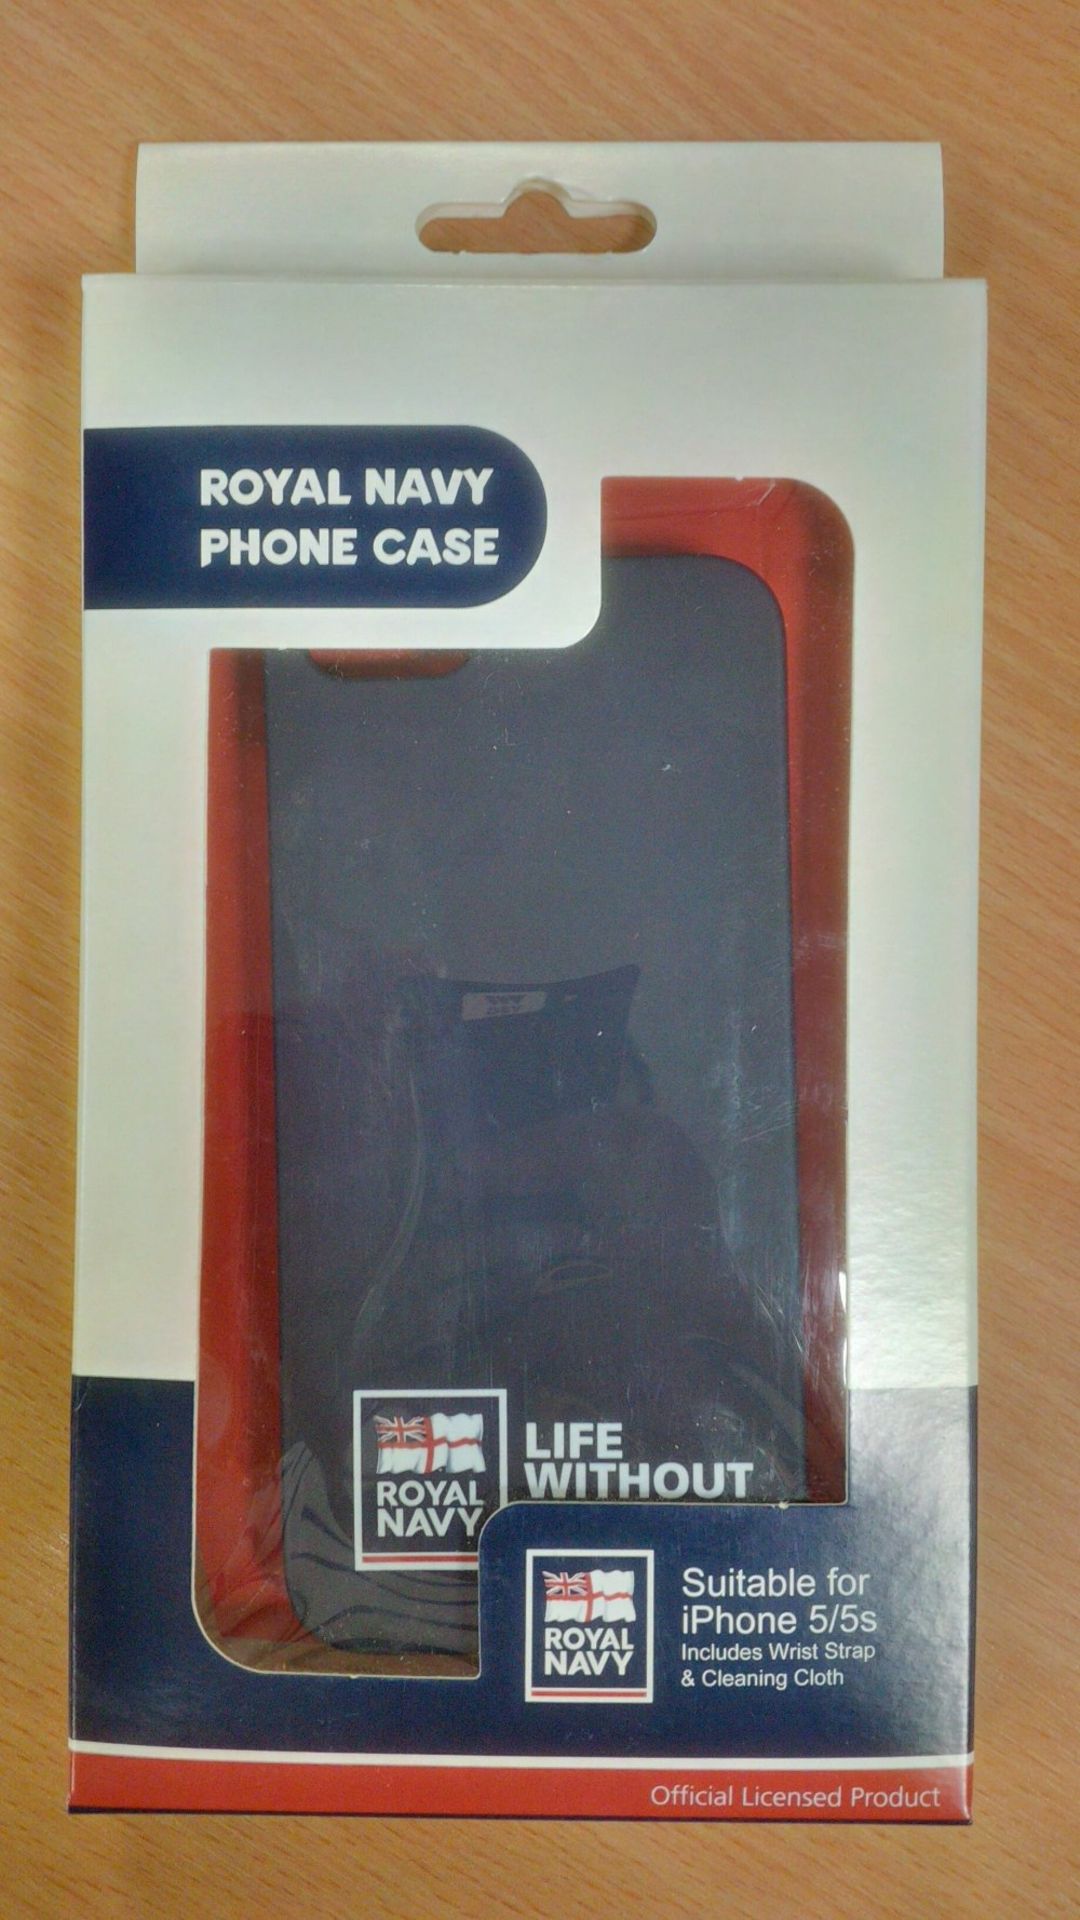 200 Official Licenced Royal Navy iPhone 5/S Premium Back Shell